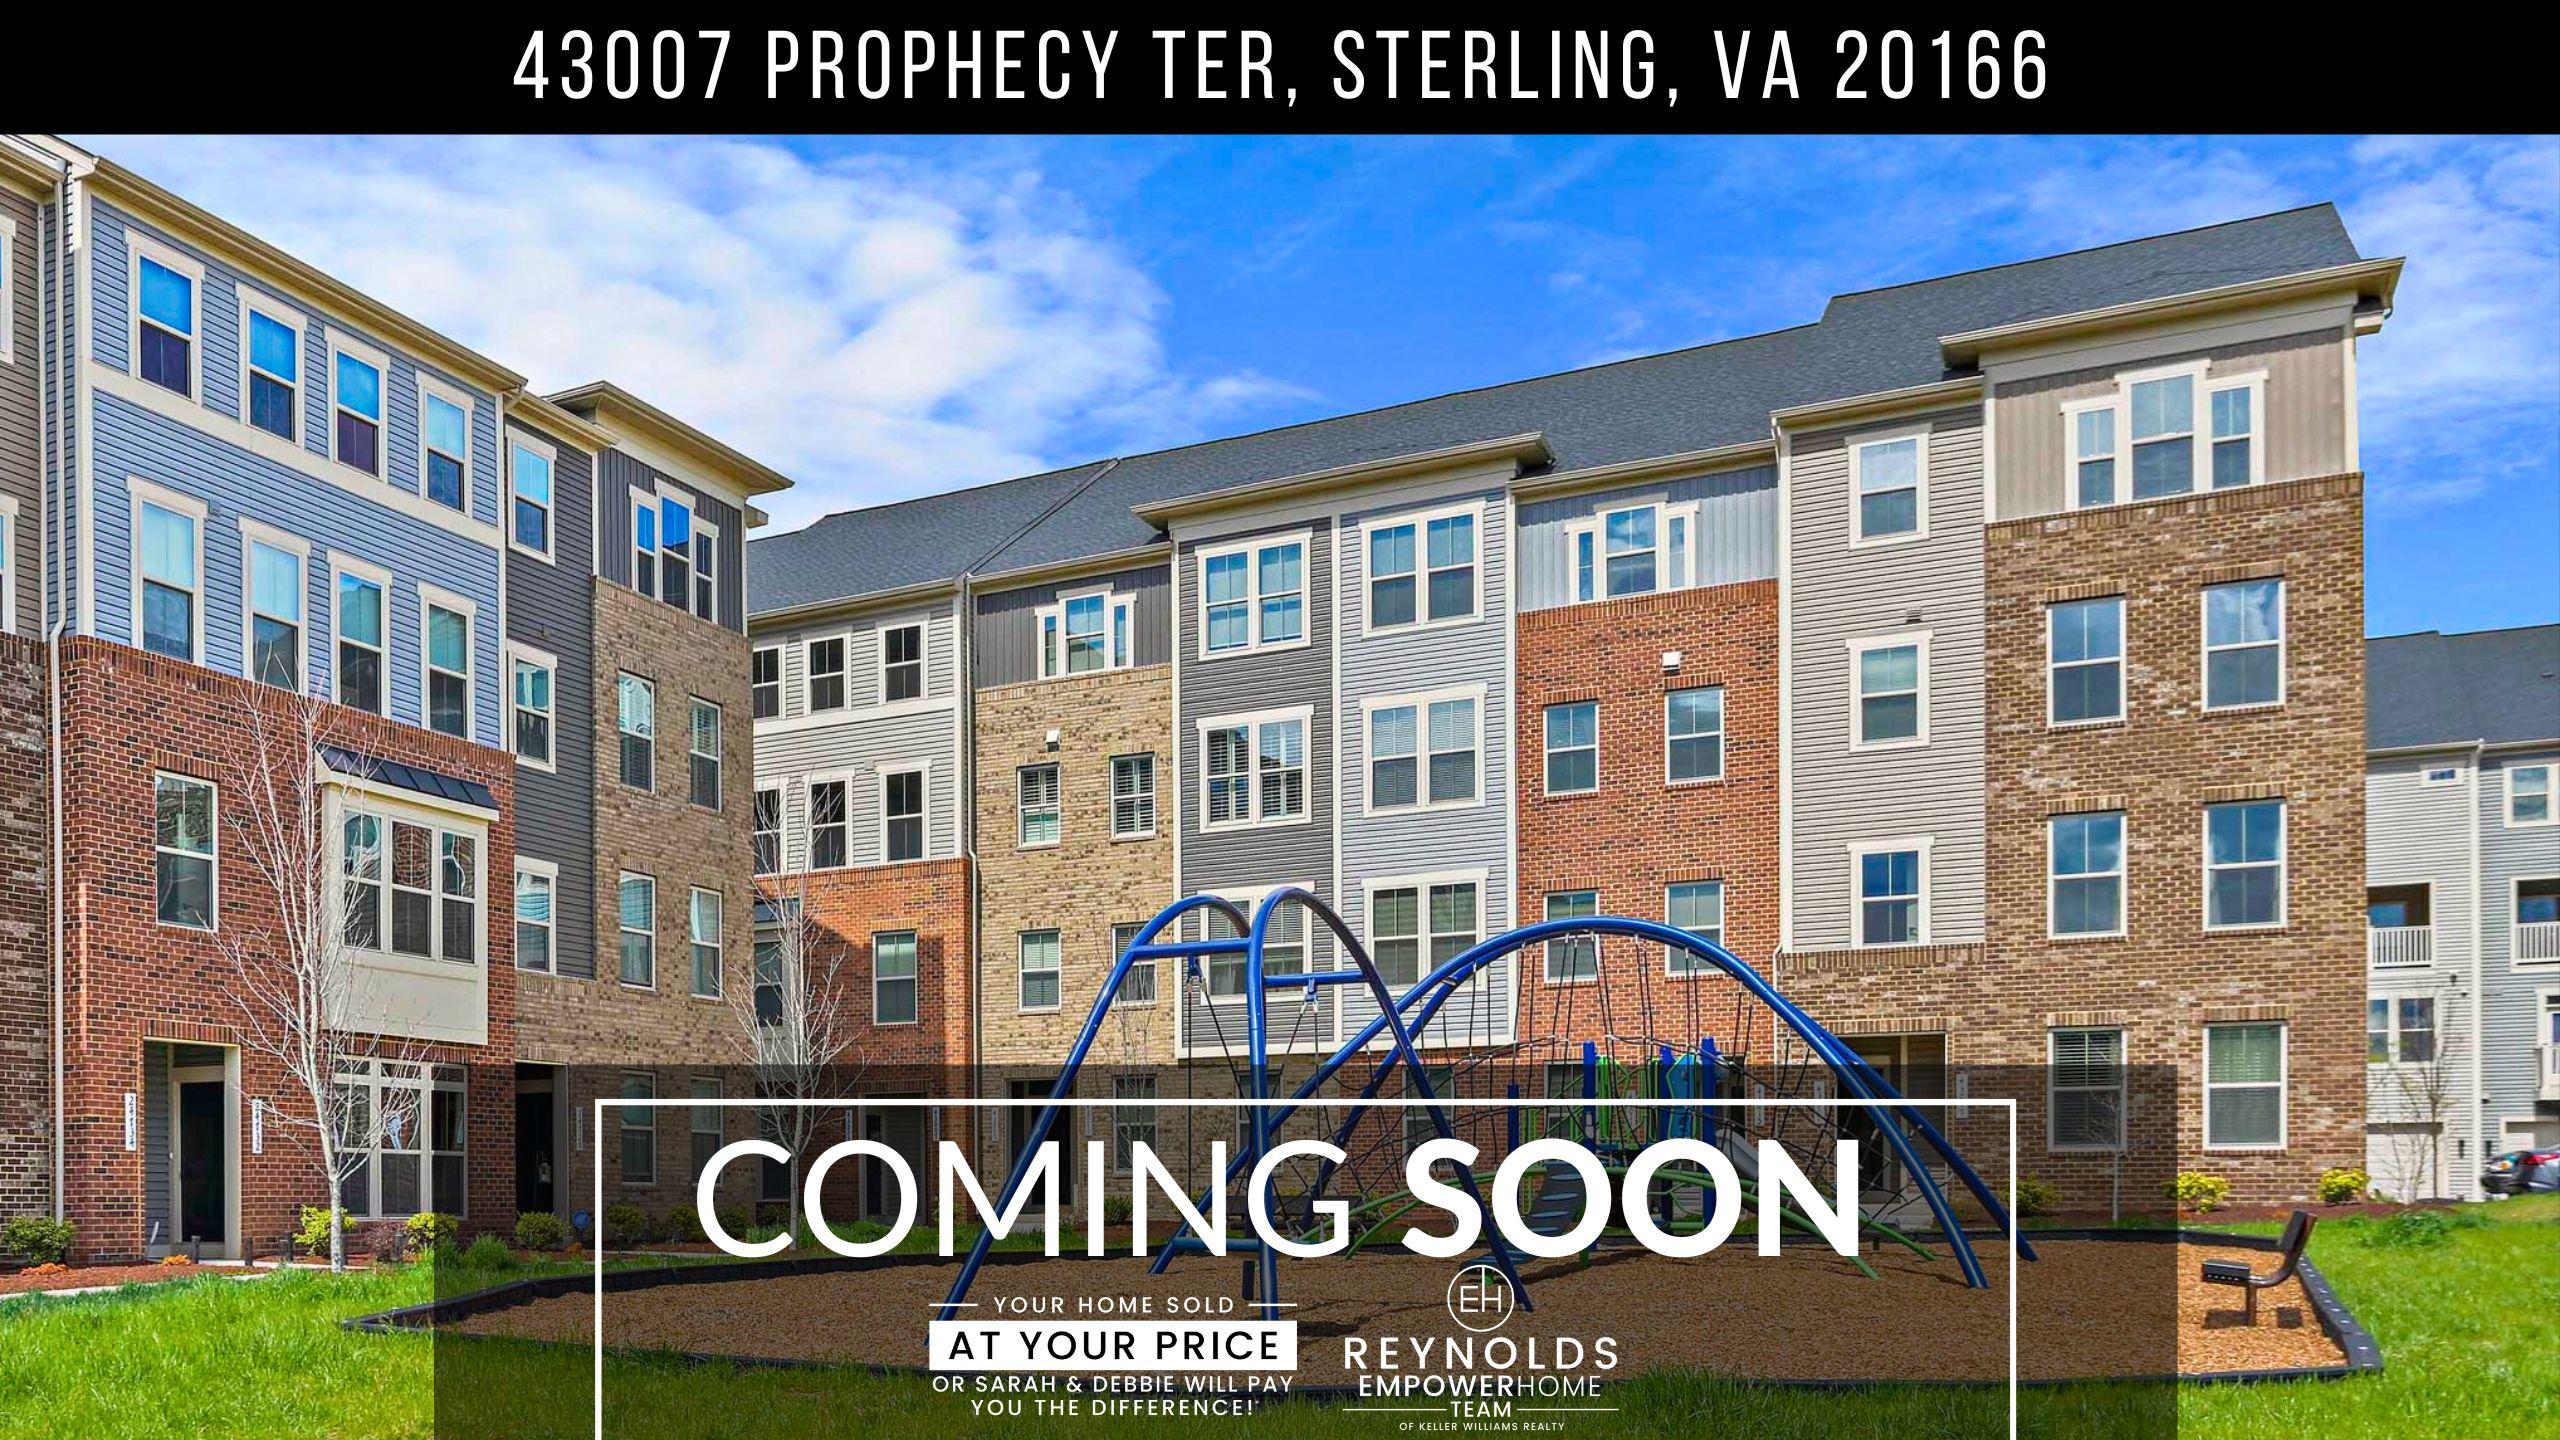 43007 Prophecy Ter, Sterling, VA 20166